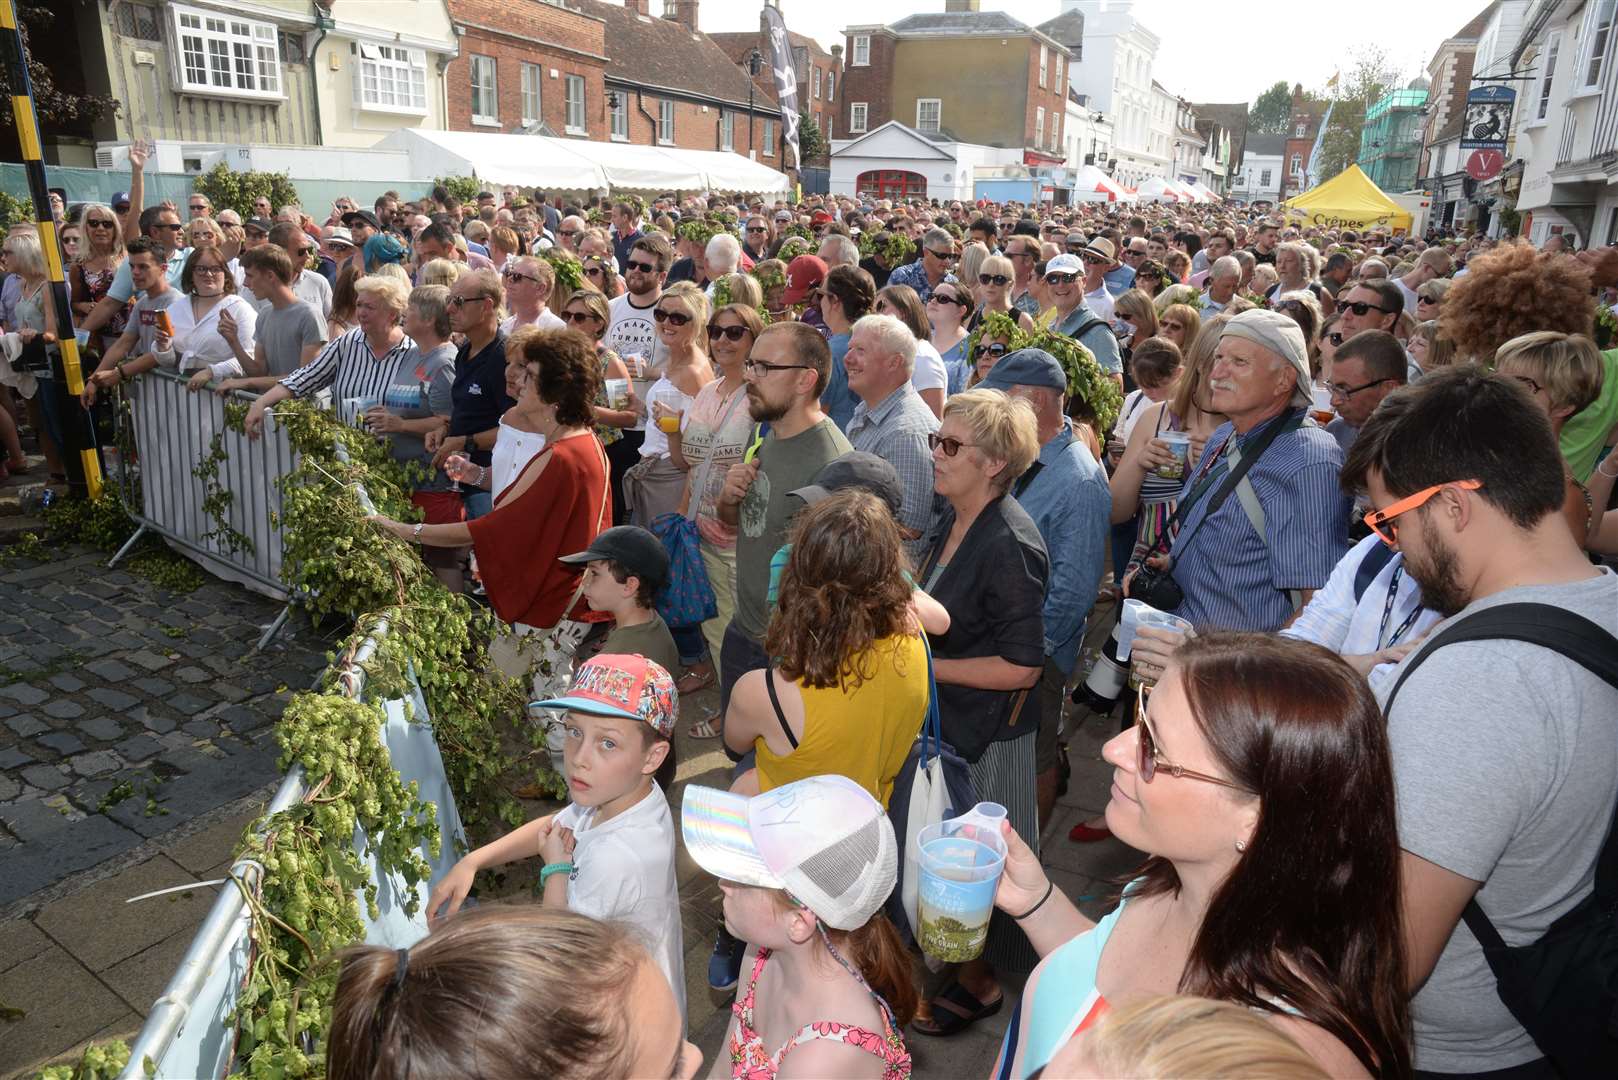 The audience for Loose Change performing on stage outside the brewery at Faversham Hop Festival last year. Picture: Chris Davey